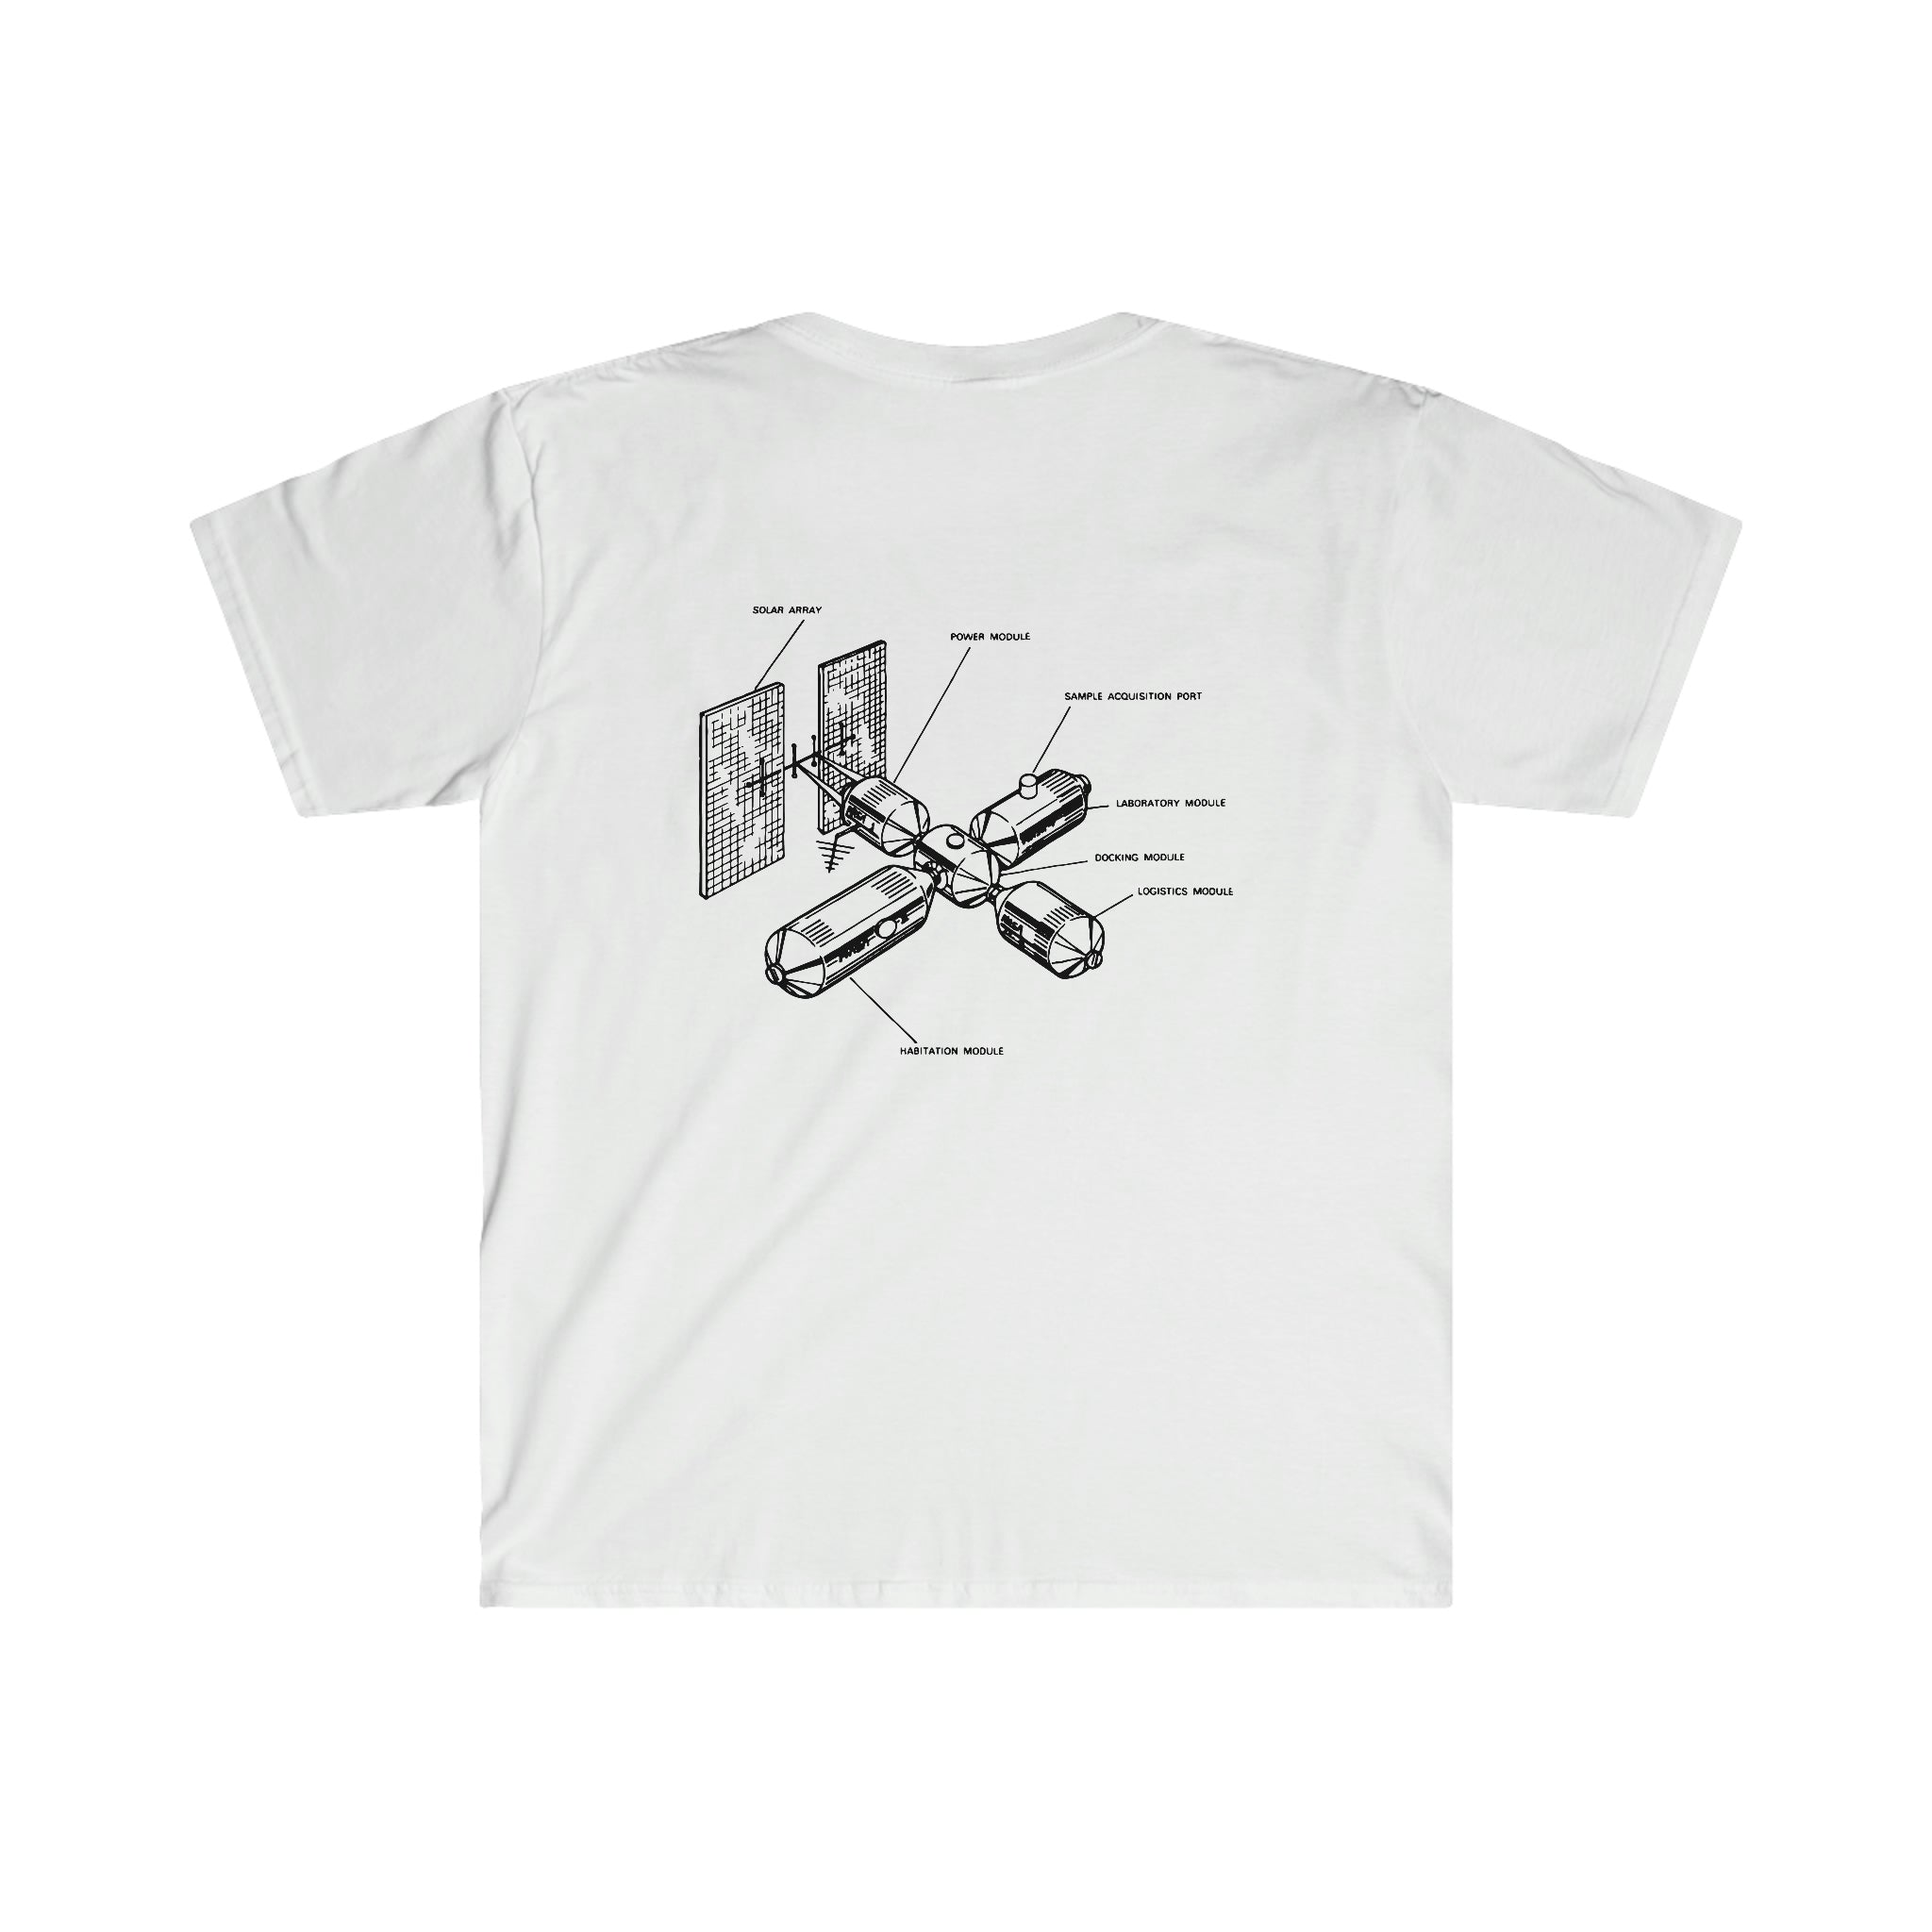 A white Space Station T-Shirt with a space station diagram on it.